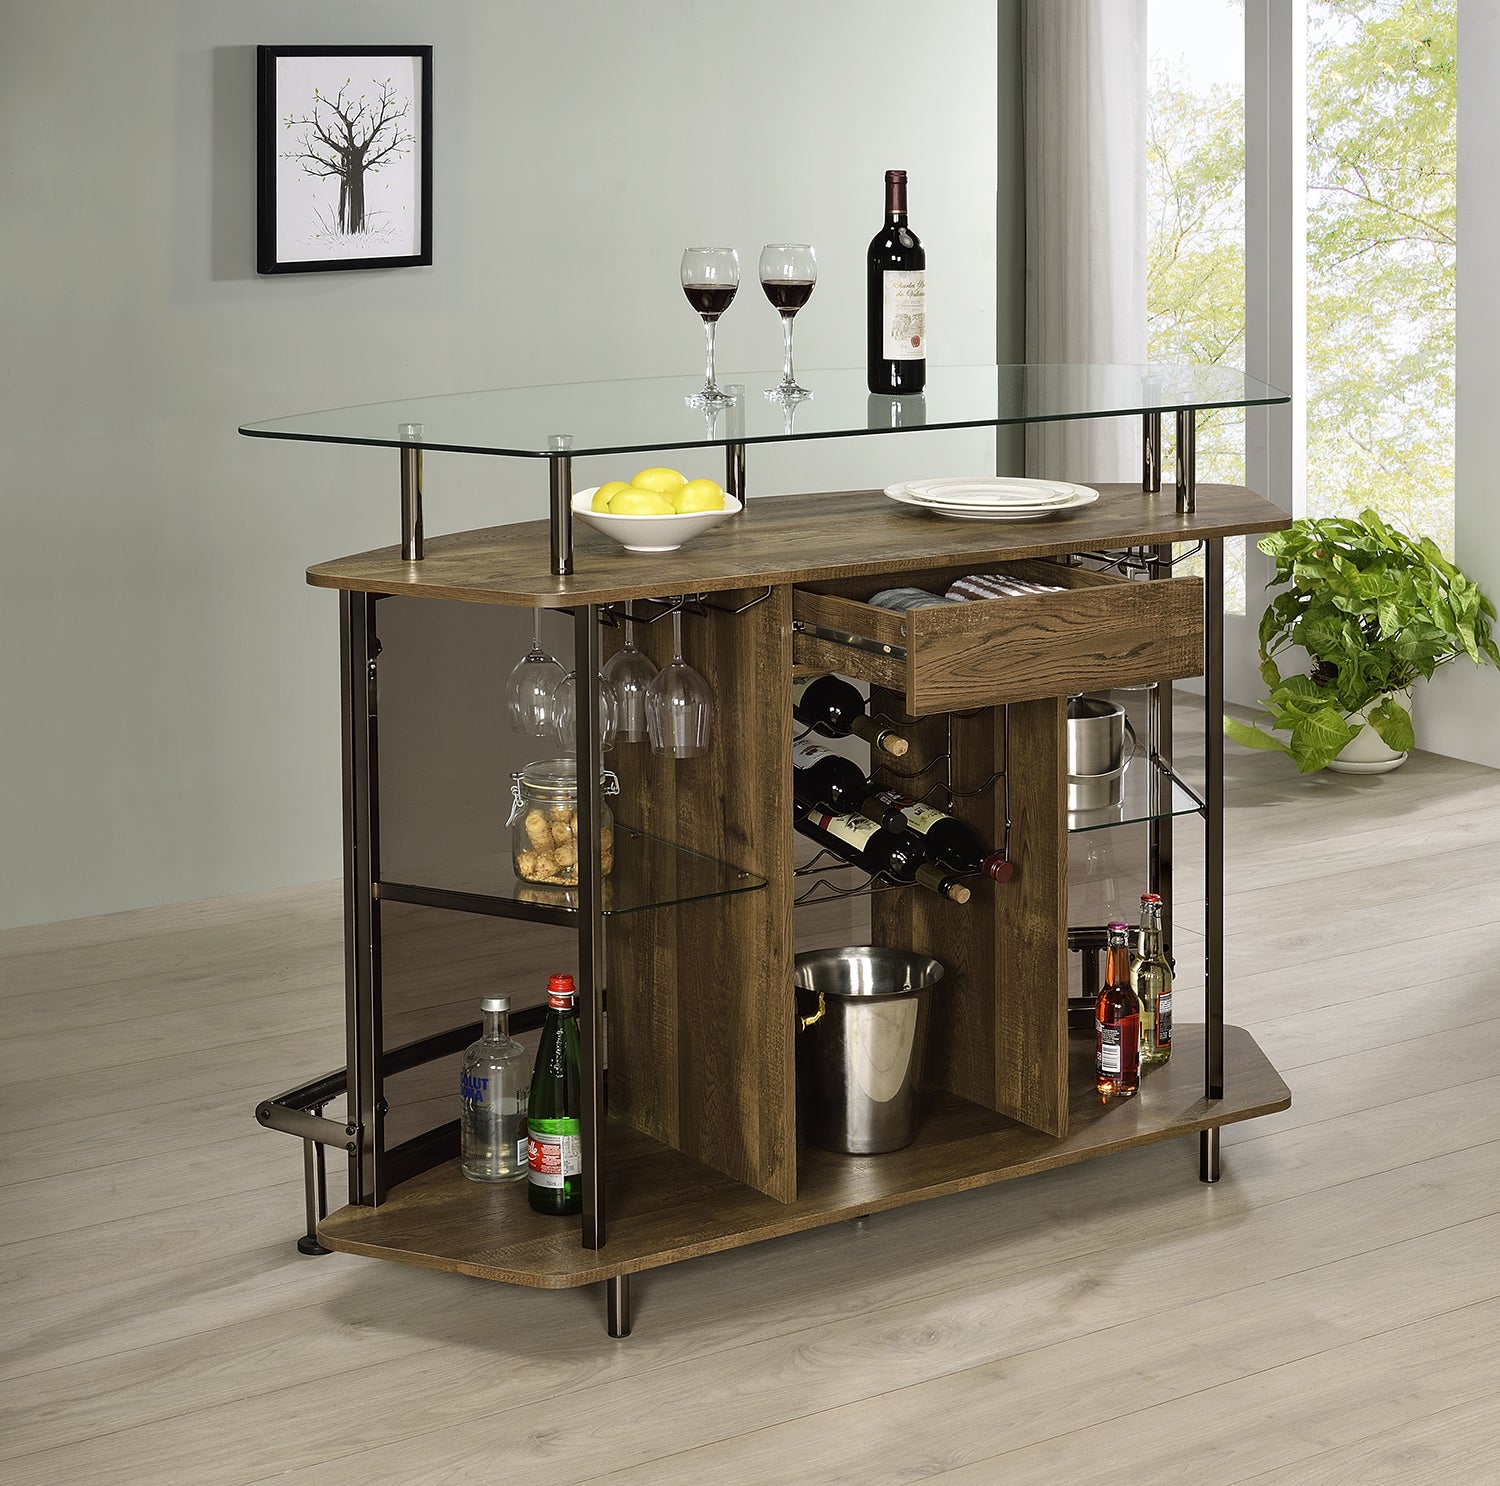 Gideon Crescent Shaped Glass Top Bar Unit with Drawer Home Bar Brown